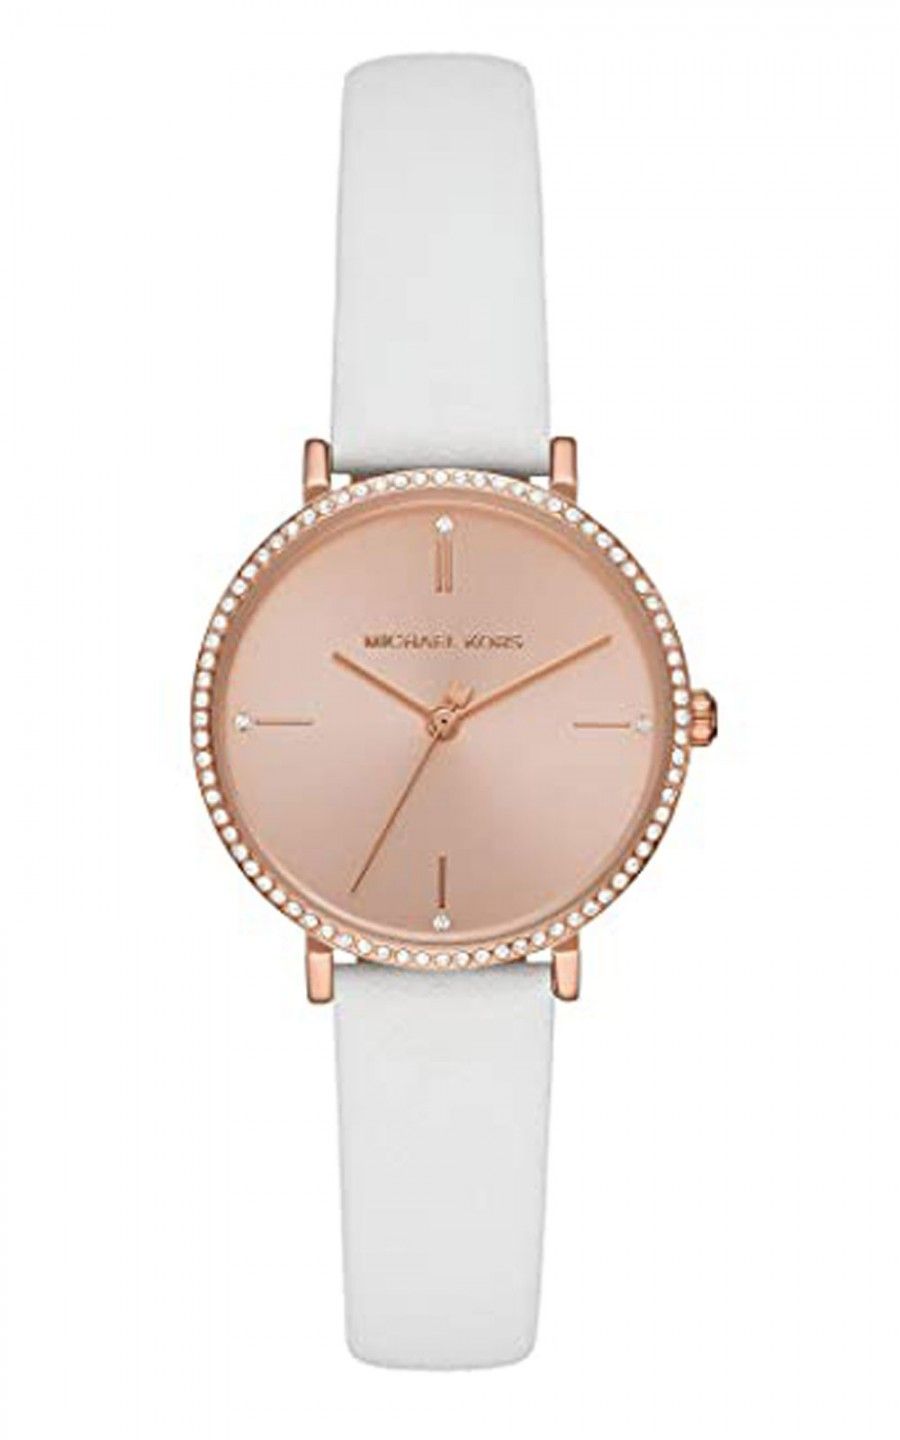 Michael Kors Jayne Threehand Leather Watch MK7105 100 Guaranteed Authentic  for sale online  eBay